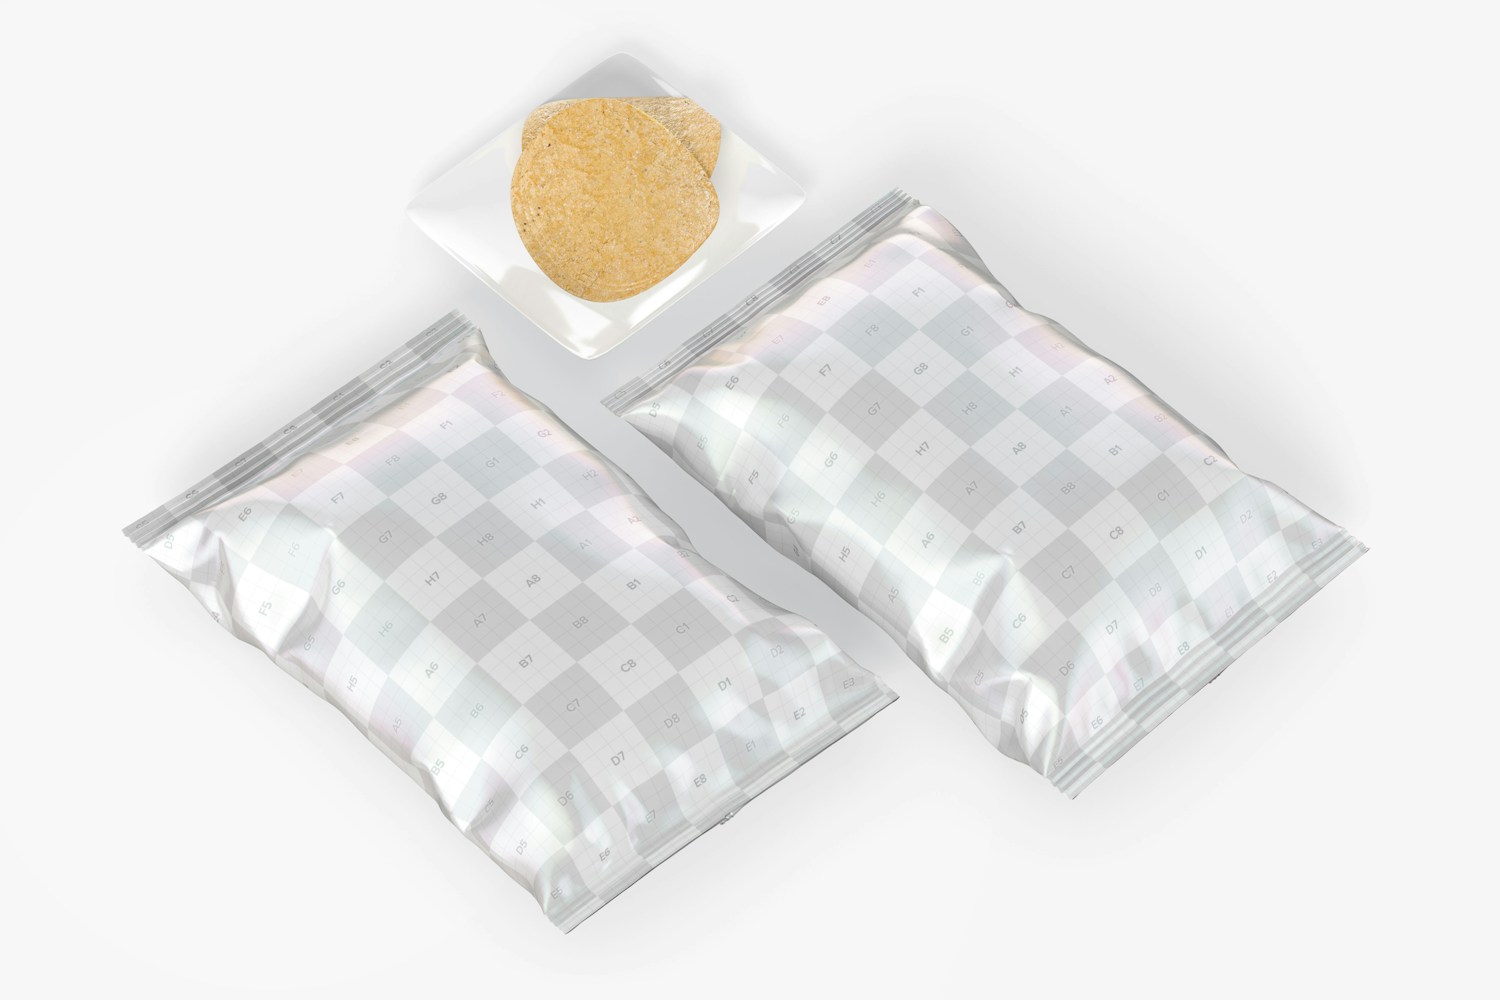 Glossy Mini Potato Chips Bags Mockup, Perspective View 02